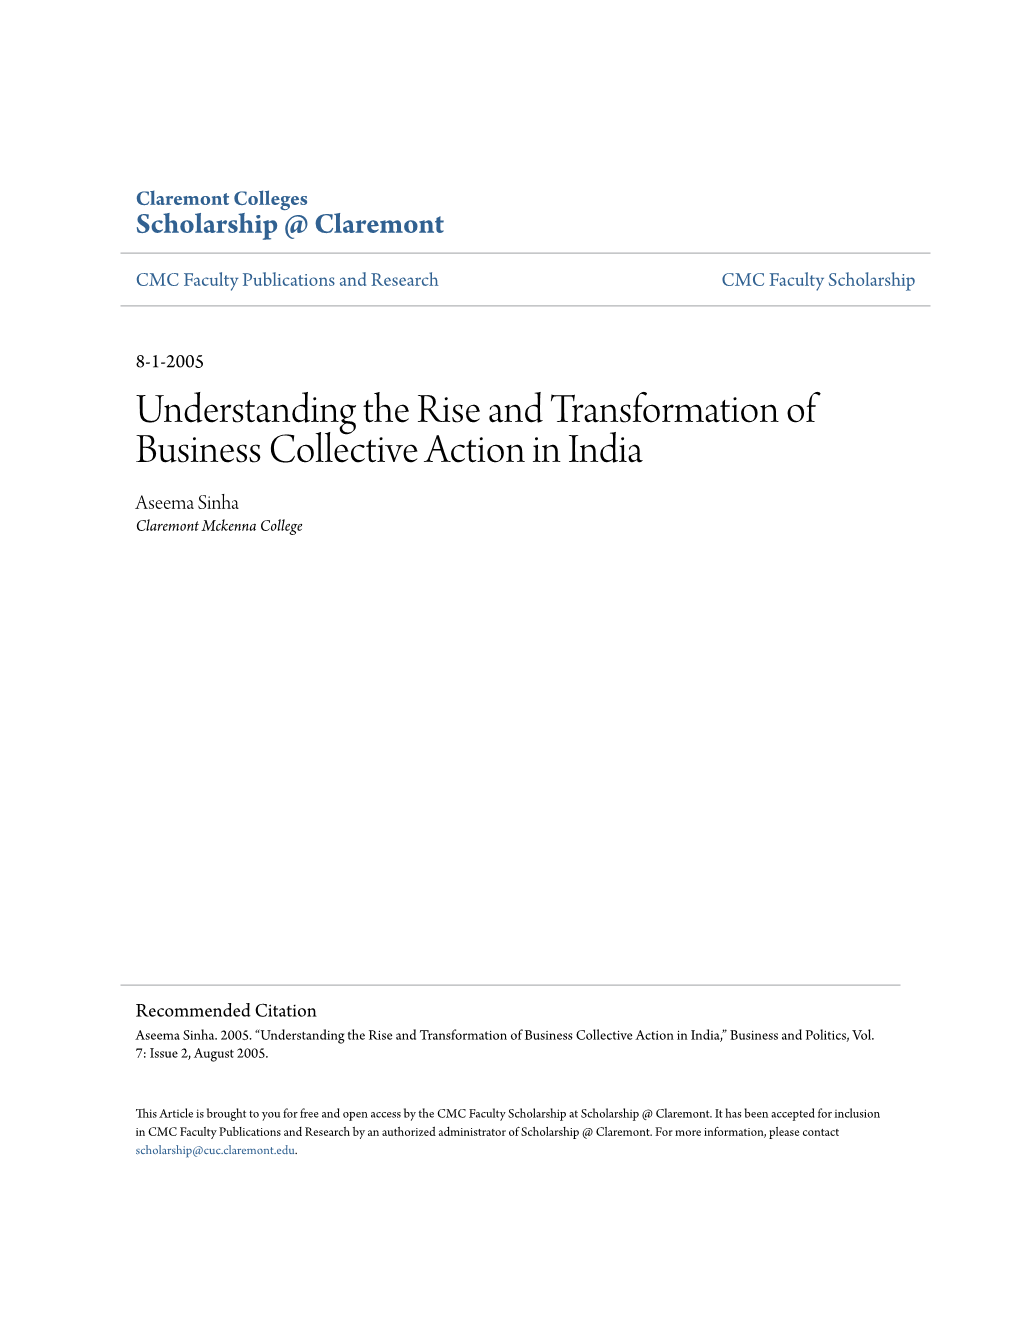 Understanding the Rise and Transformation of Business Collective Action in India Aseema Sinha Claremont Mckenna College